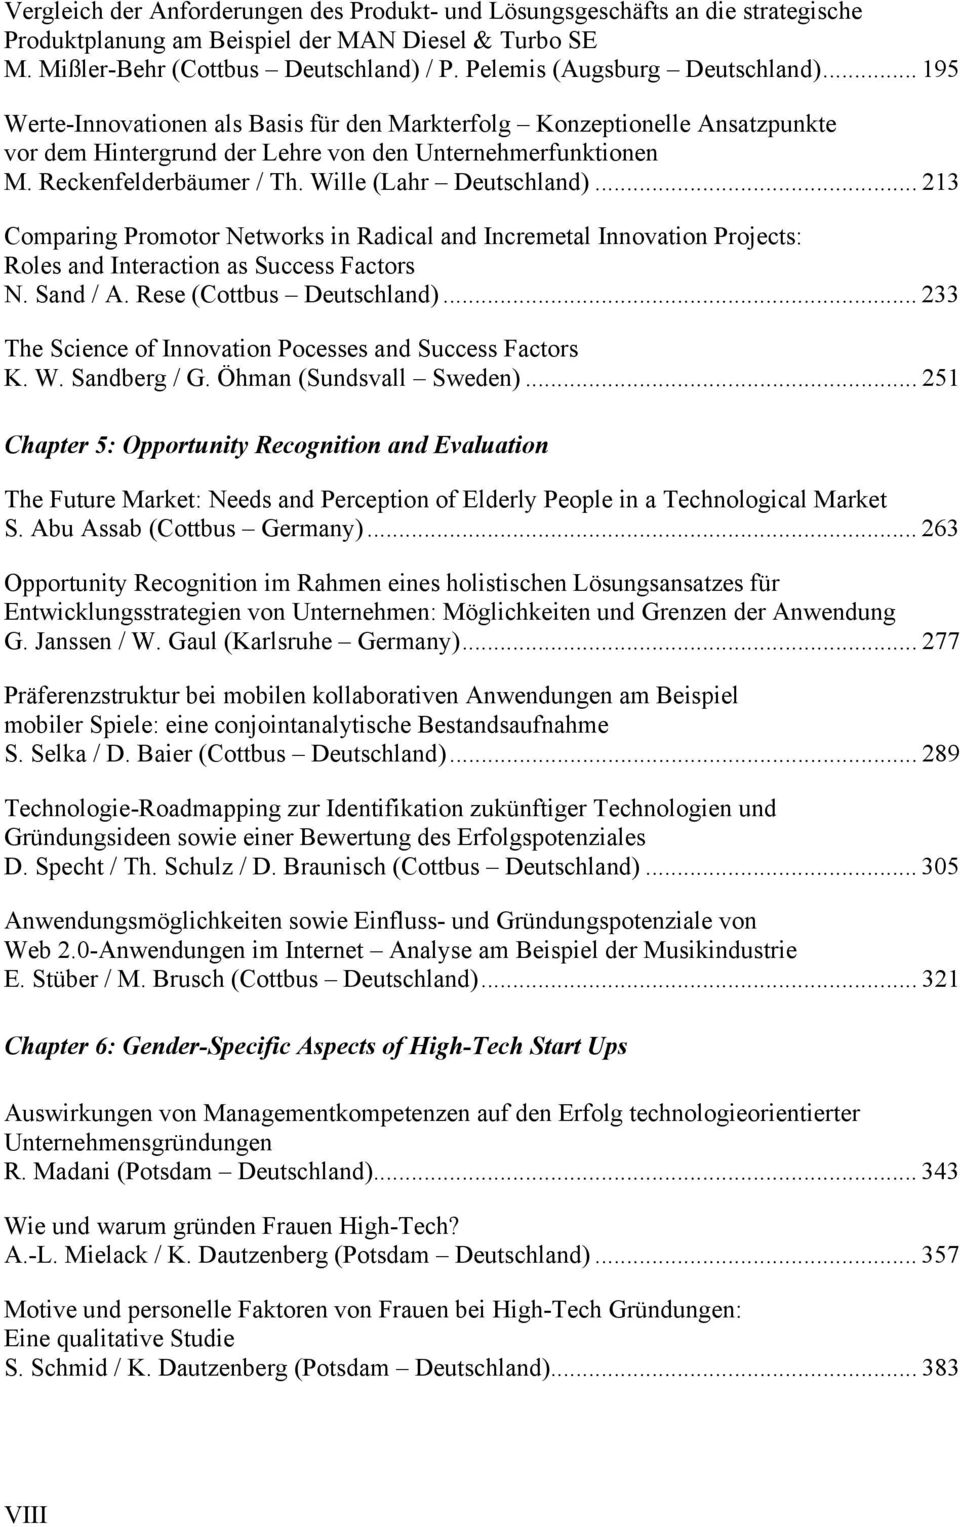 Reckenfelderbäumer / Th. Wille (Lahr Deutschland)... 213 Comparing Promotor Networks in Radical and Incremetal Innovation Projects: Roles and Interaction as Success Factors N. Sand / A.